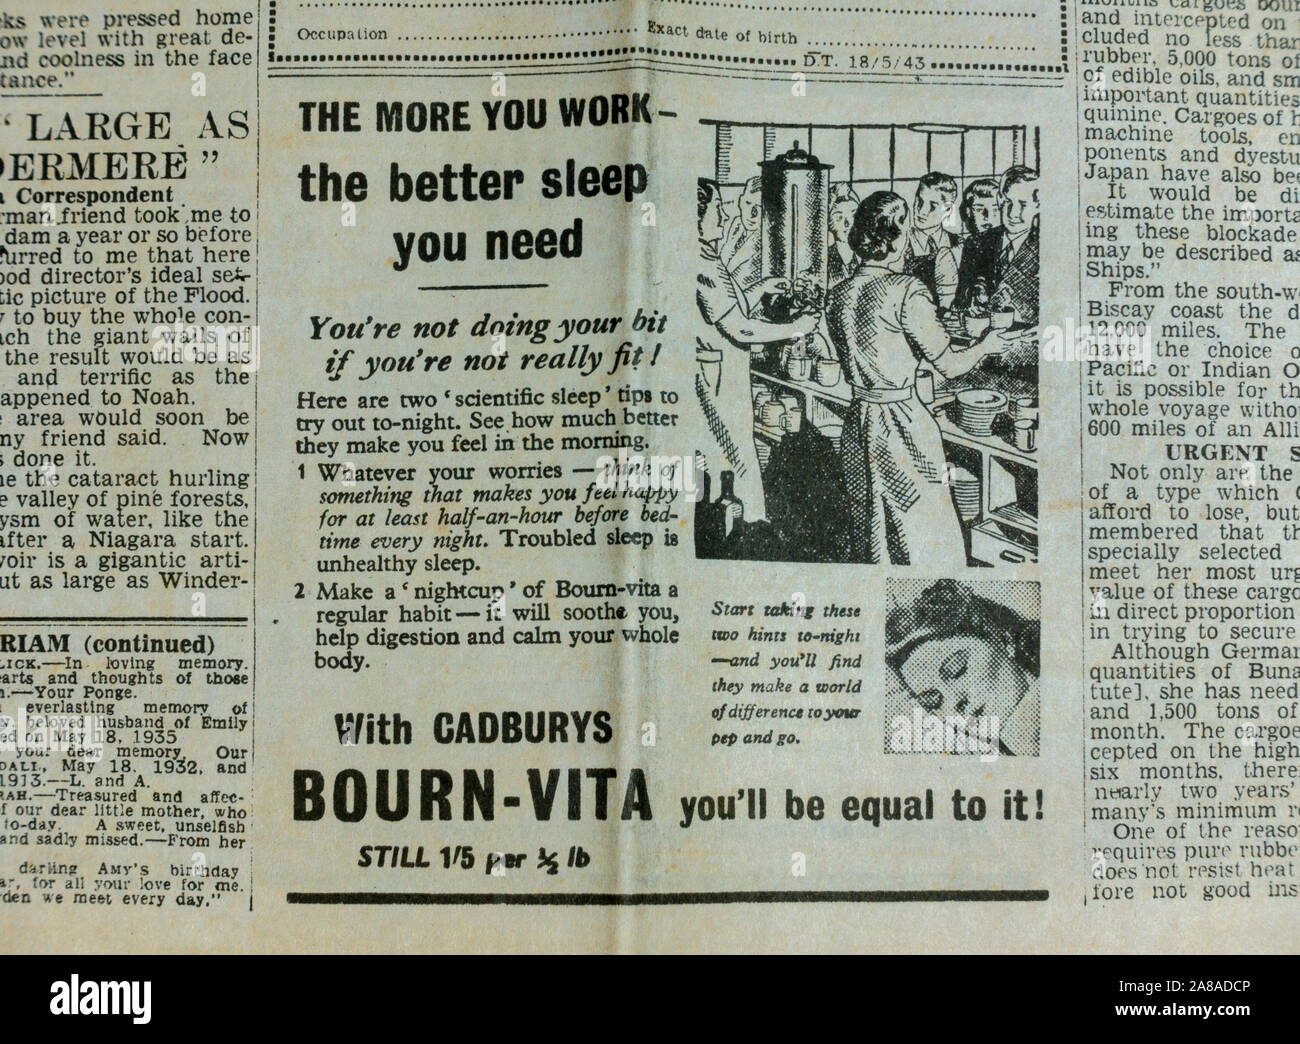 Advert for Cadburys Bourn-vita in The Daily Telegraph (replica), 18th May 1943, the day after the Dam Busters raid. Stock Photo